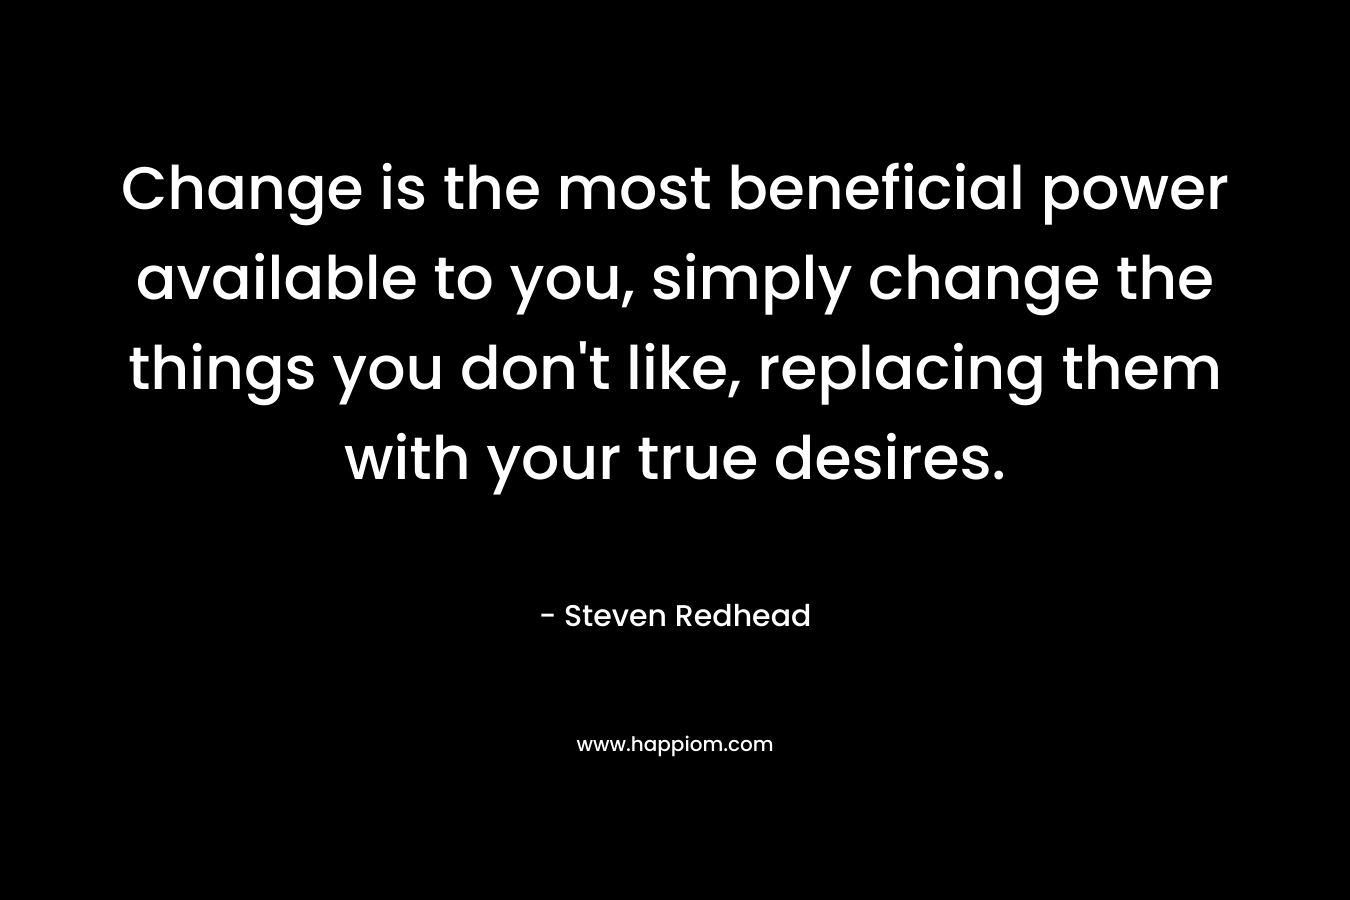 Change is the most beneficial power available to you, simply change the things you don’t like, replacing them with your true desires. – Steven Redhead